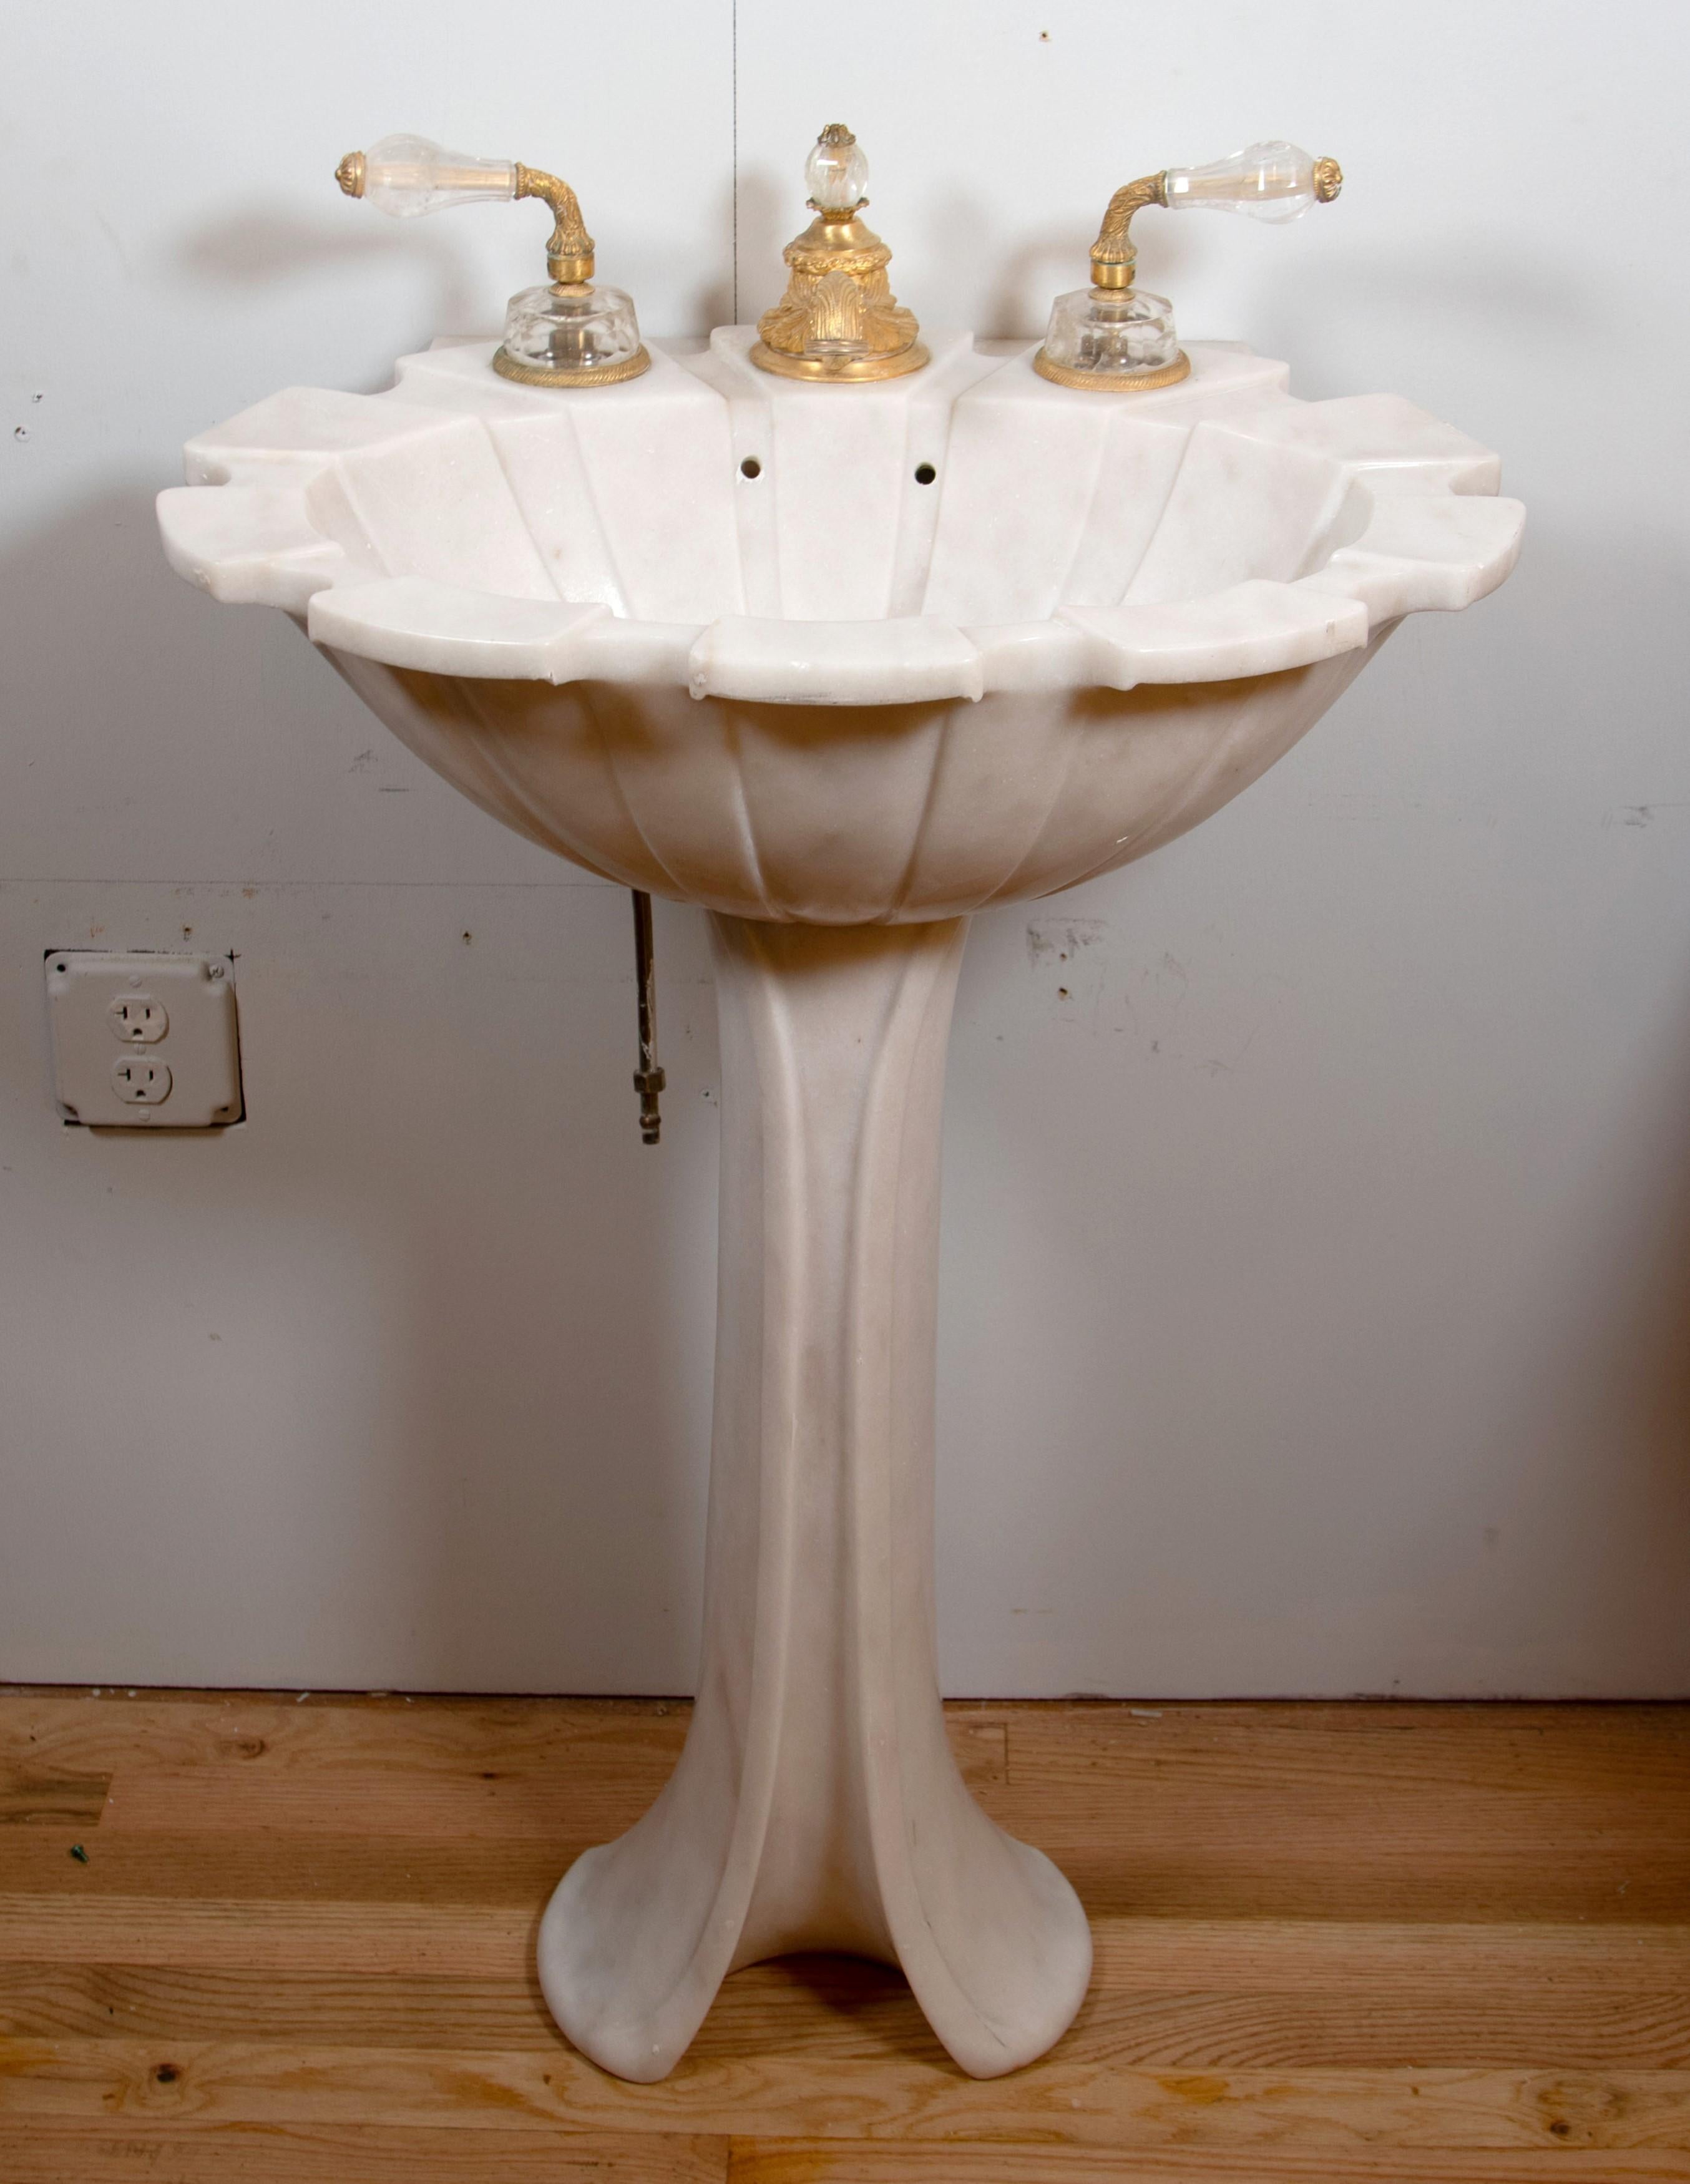 Sheryl Wagner pedestal sink with cut glass and gilt hardware in a white veined marble construction. Good condition with appropriate wear from age. One available. Please note, this item is located in one of our NYC locations.